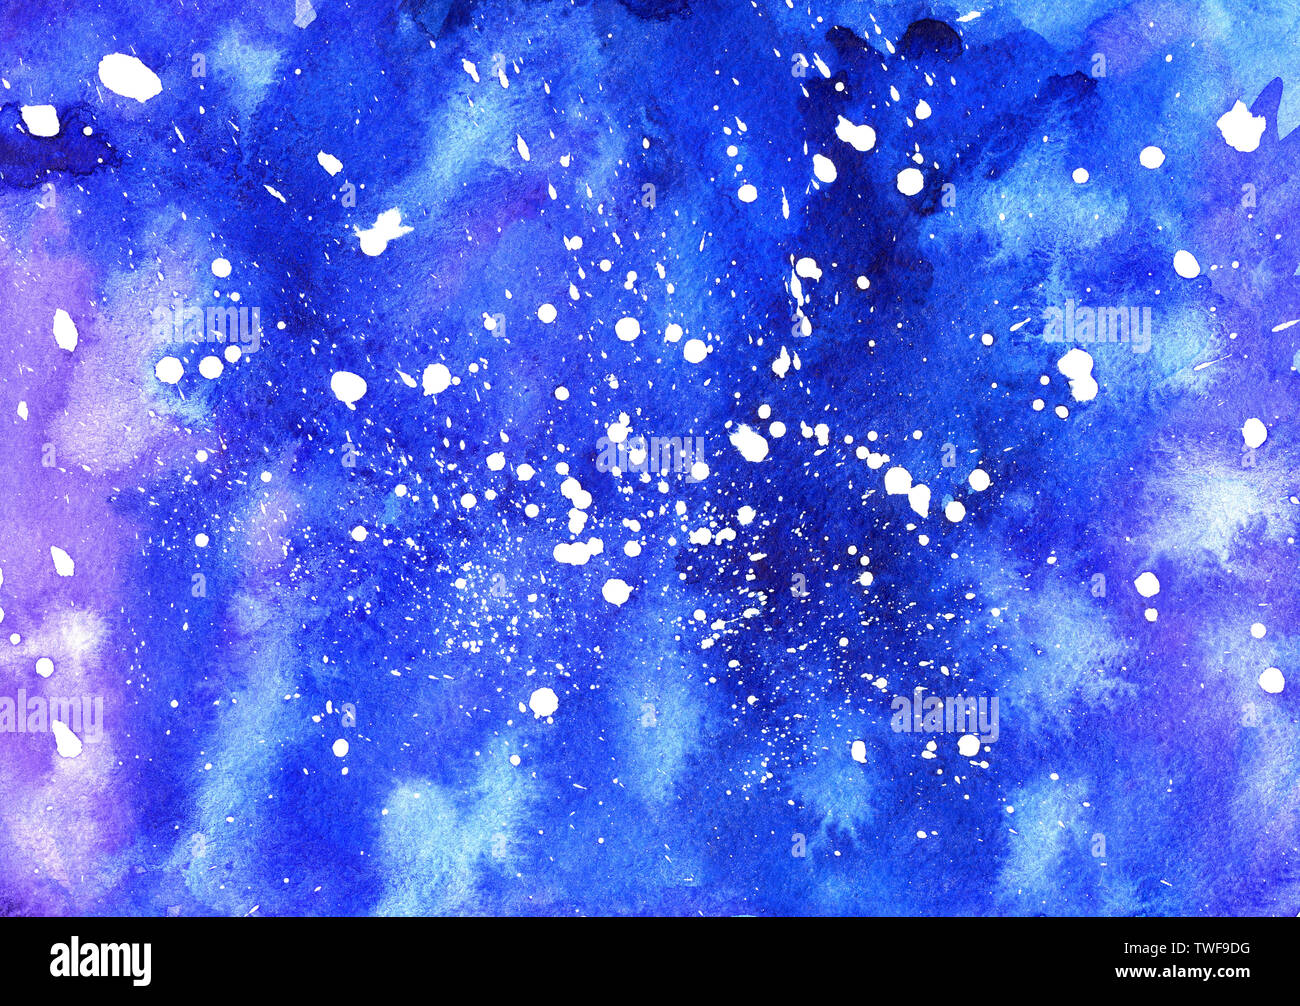 Abstract watercolor hand drawn blue cosmic background with white splashes. Blue and violet nebulae. Stock Photo